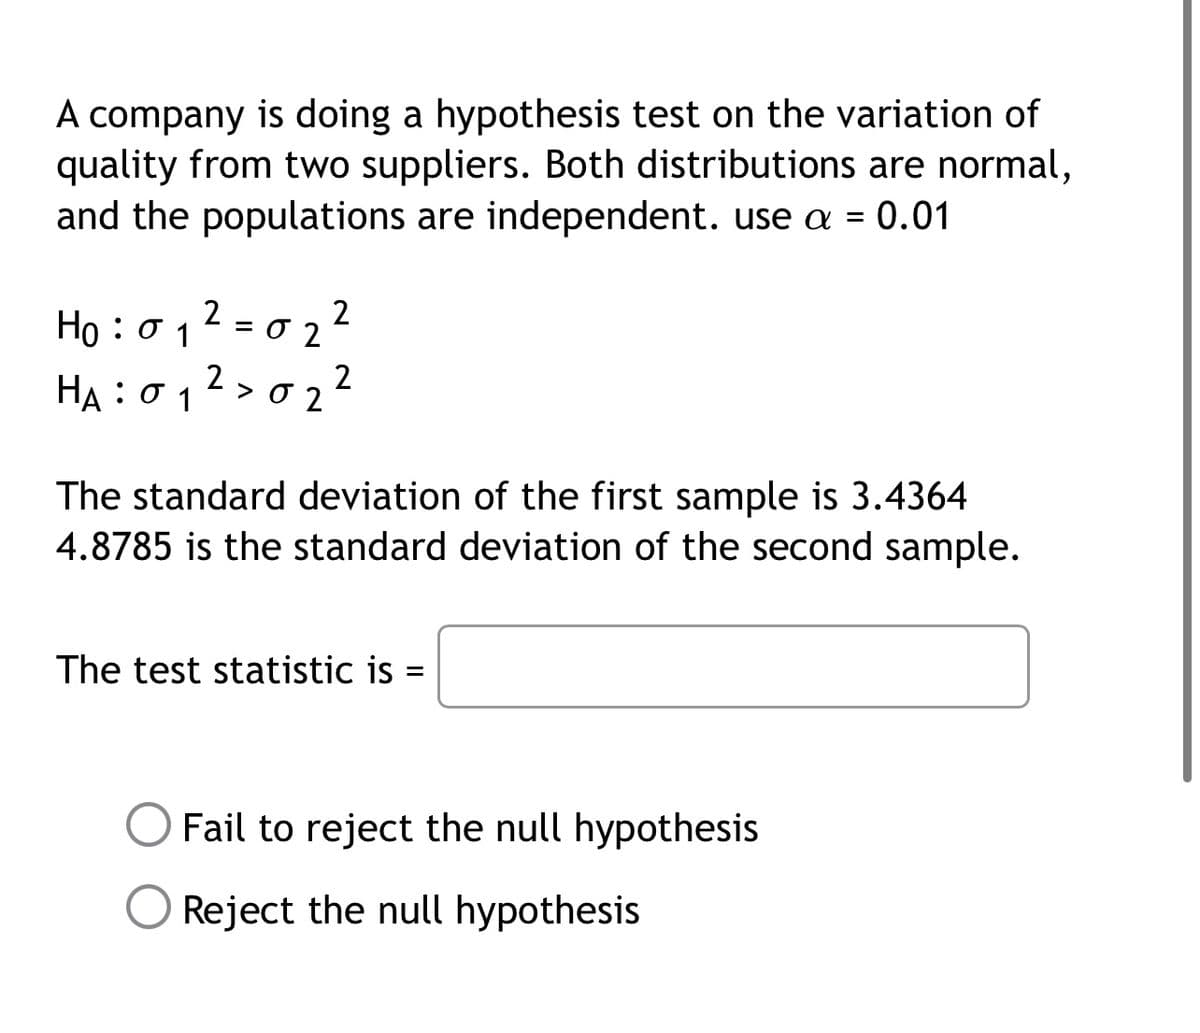 A company is doing a hypothesis test on the variation of
quality from two suppliers. Both distributions are normal,
and the populations are independent. use a = 0.01
2 = 0 2?
2
HA : σ1
2
> 0 2
The standard deviation of the first sample is 3.4364
4.8785 is the standard deviation of the second sample.
The test statistic is
Fail to reject the null hypothesis
Reject the null hypothesis
